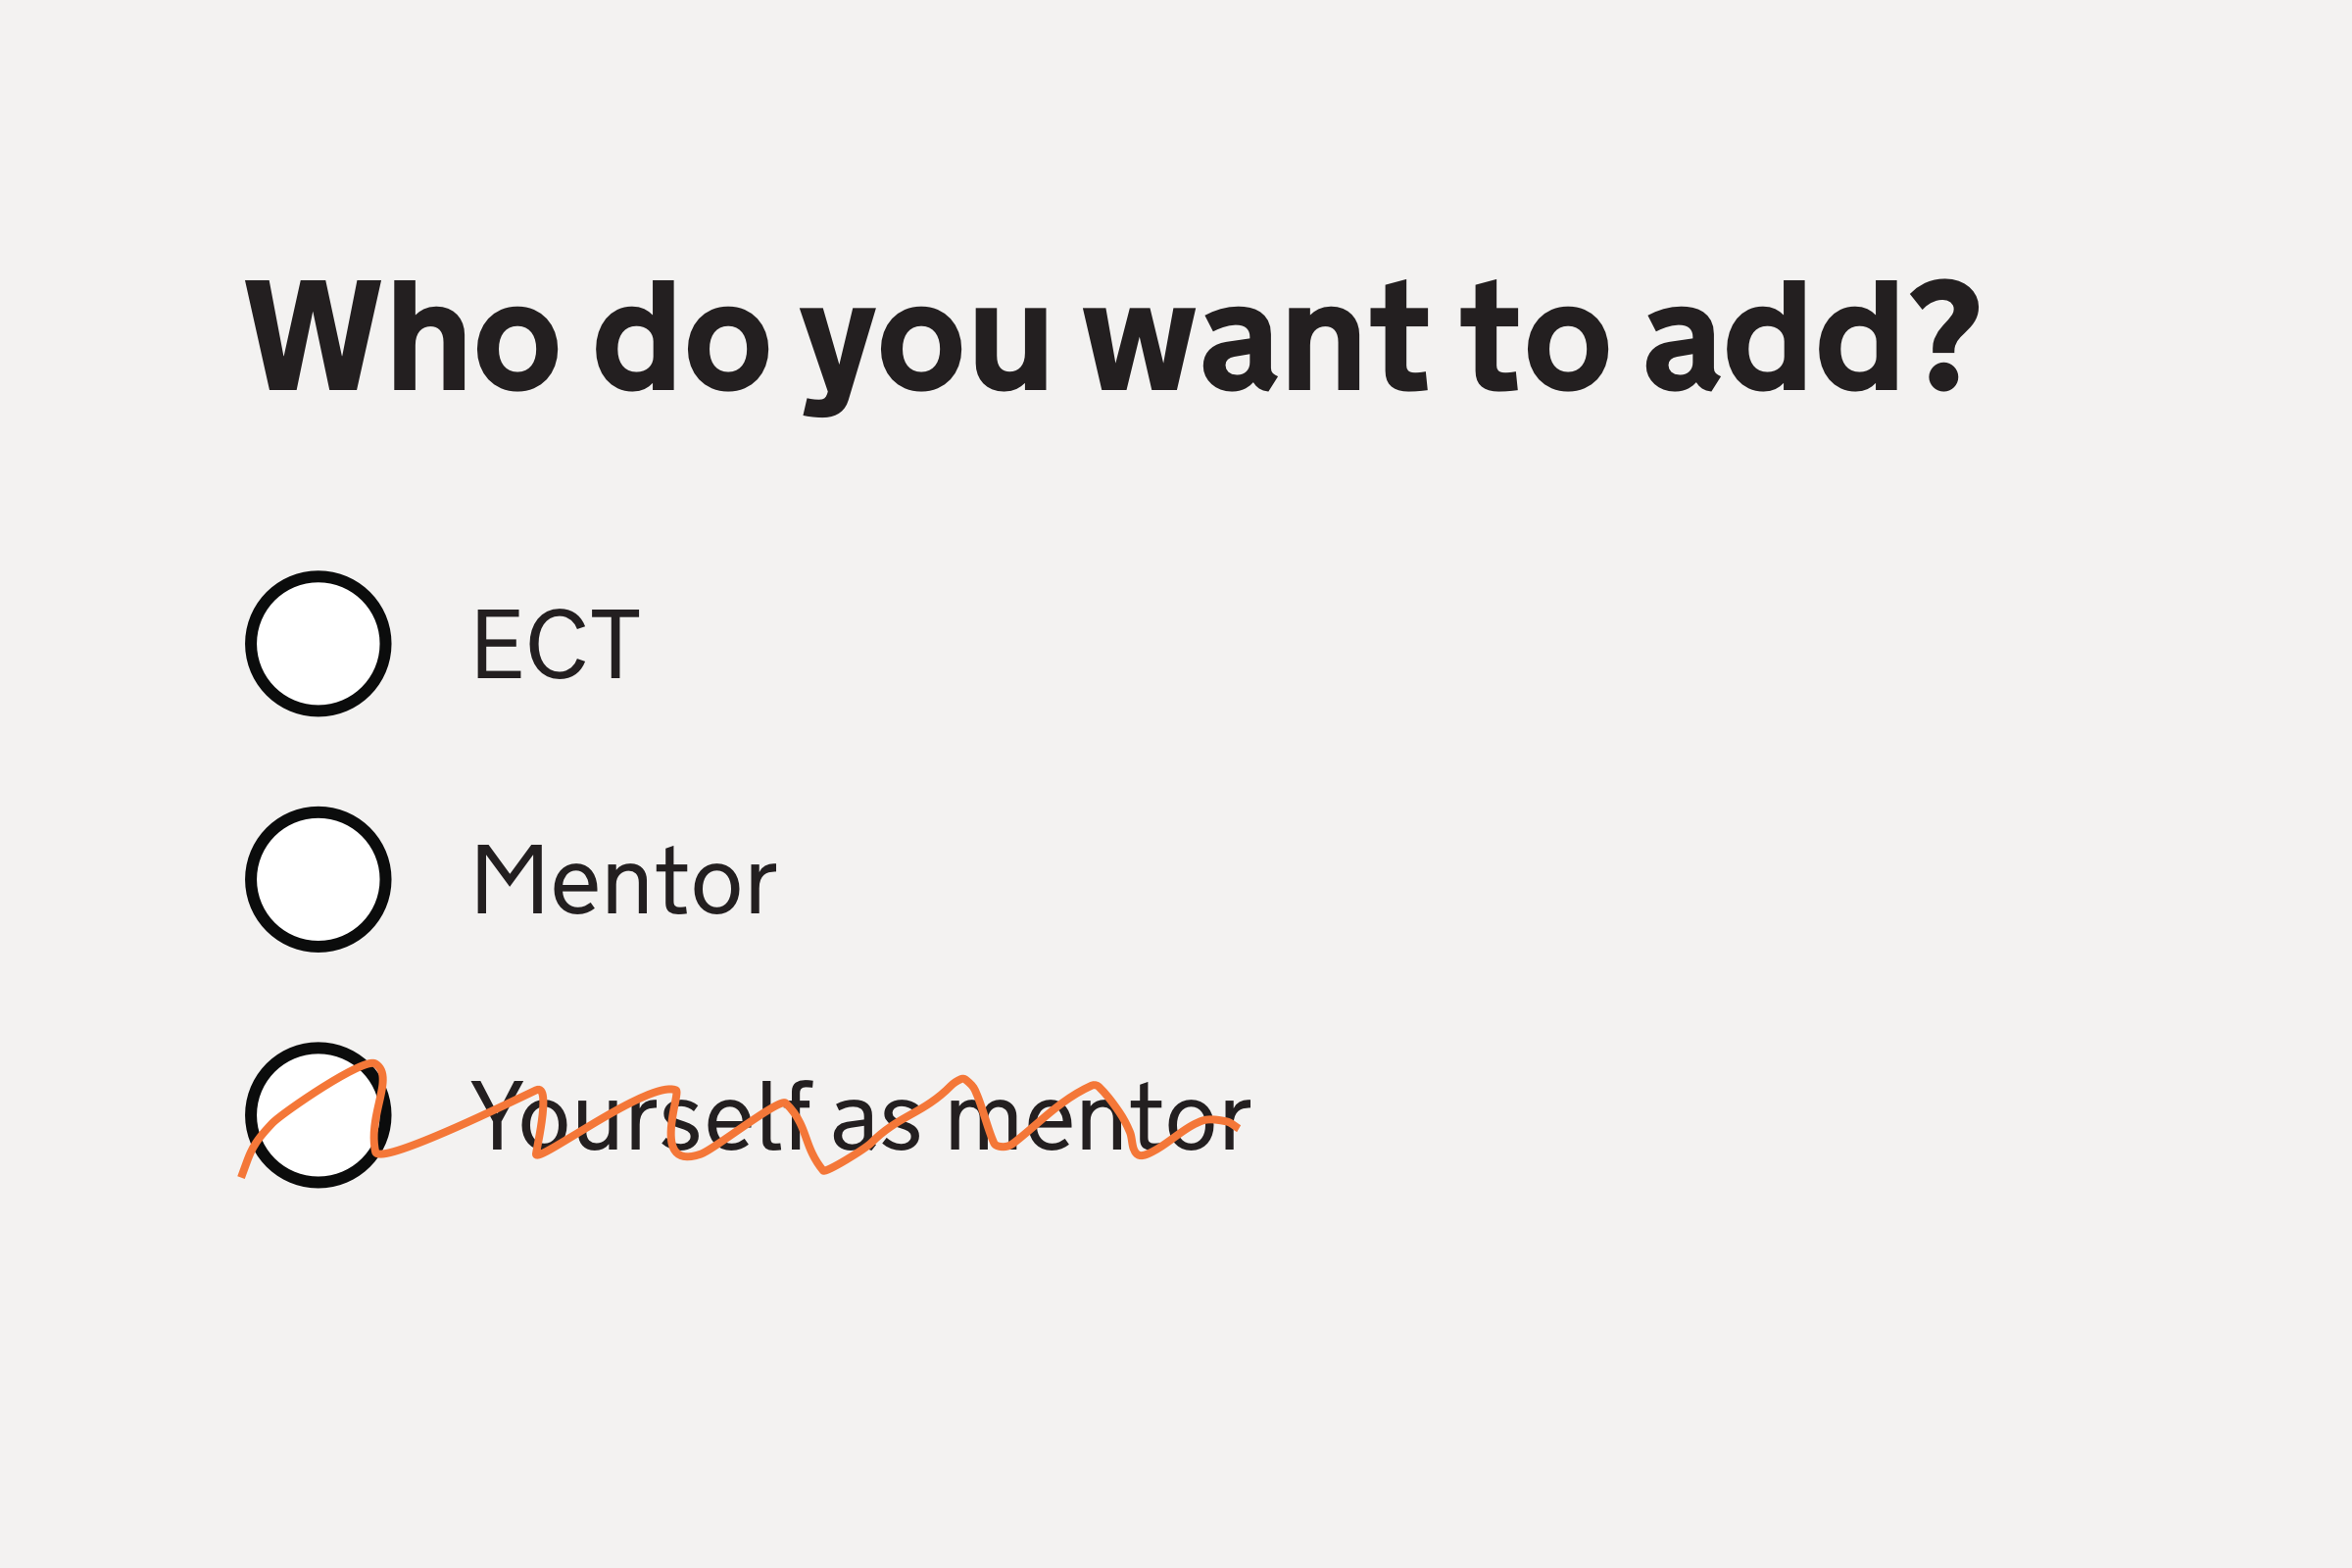 Illustration showing “Who do you want to add?” with the options of ECT, Mentor and with “Yourself as mentor” crossed out